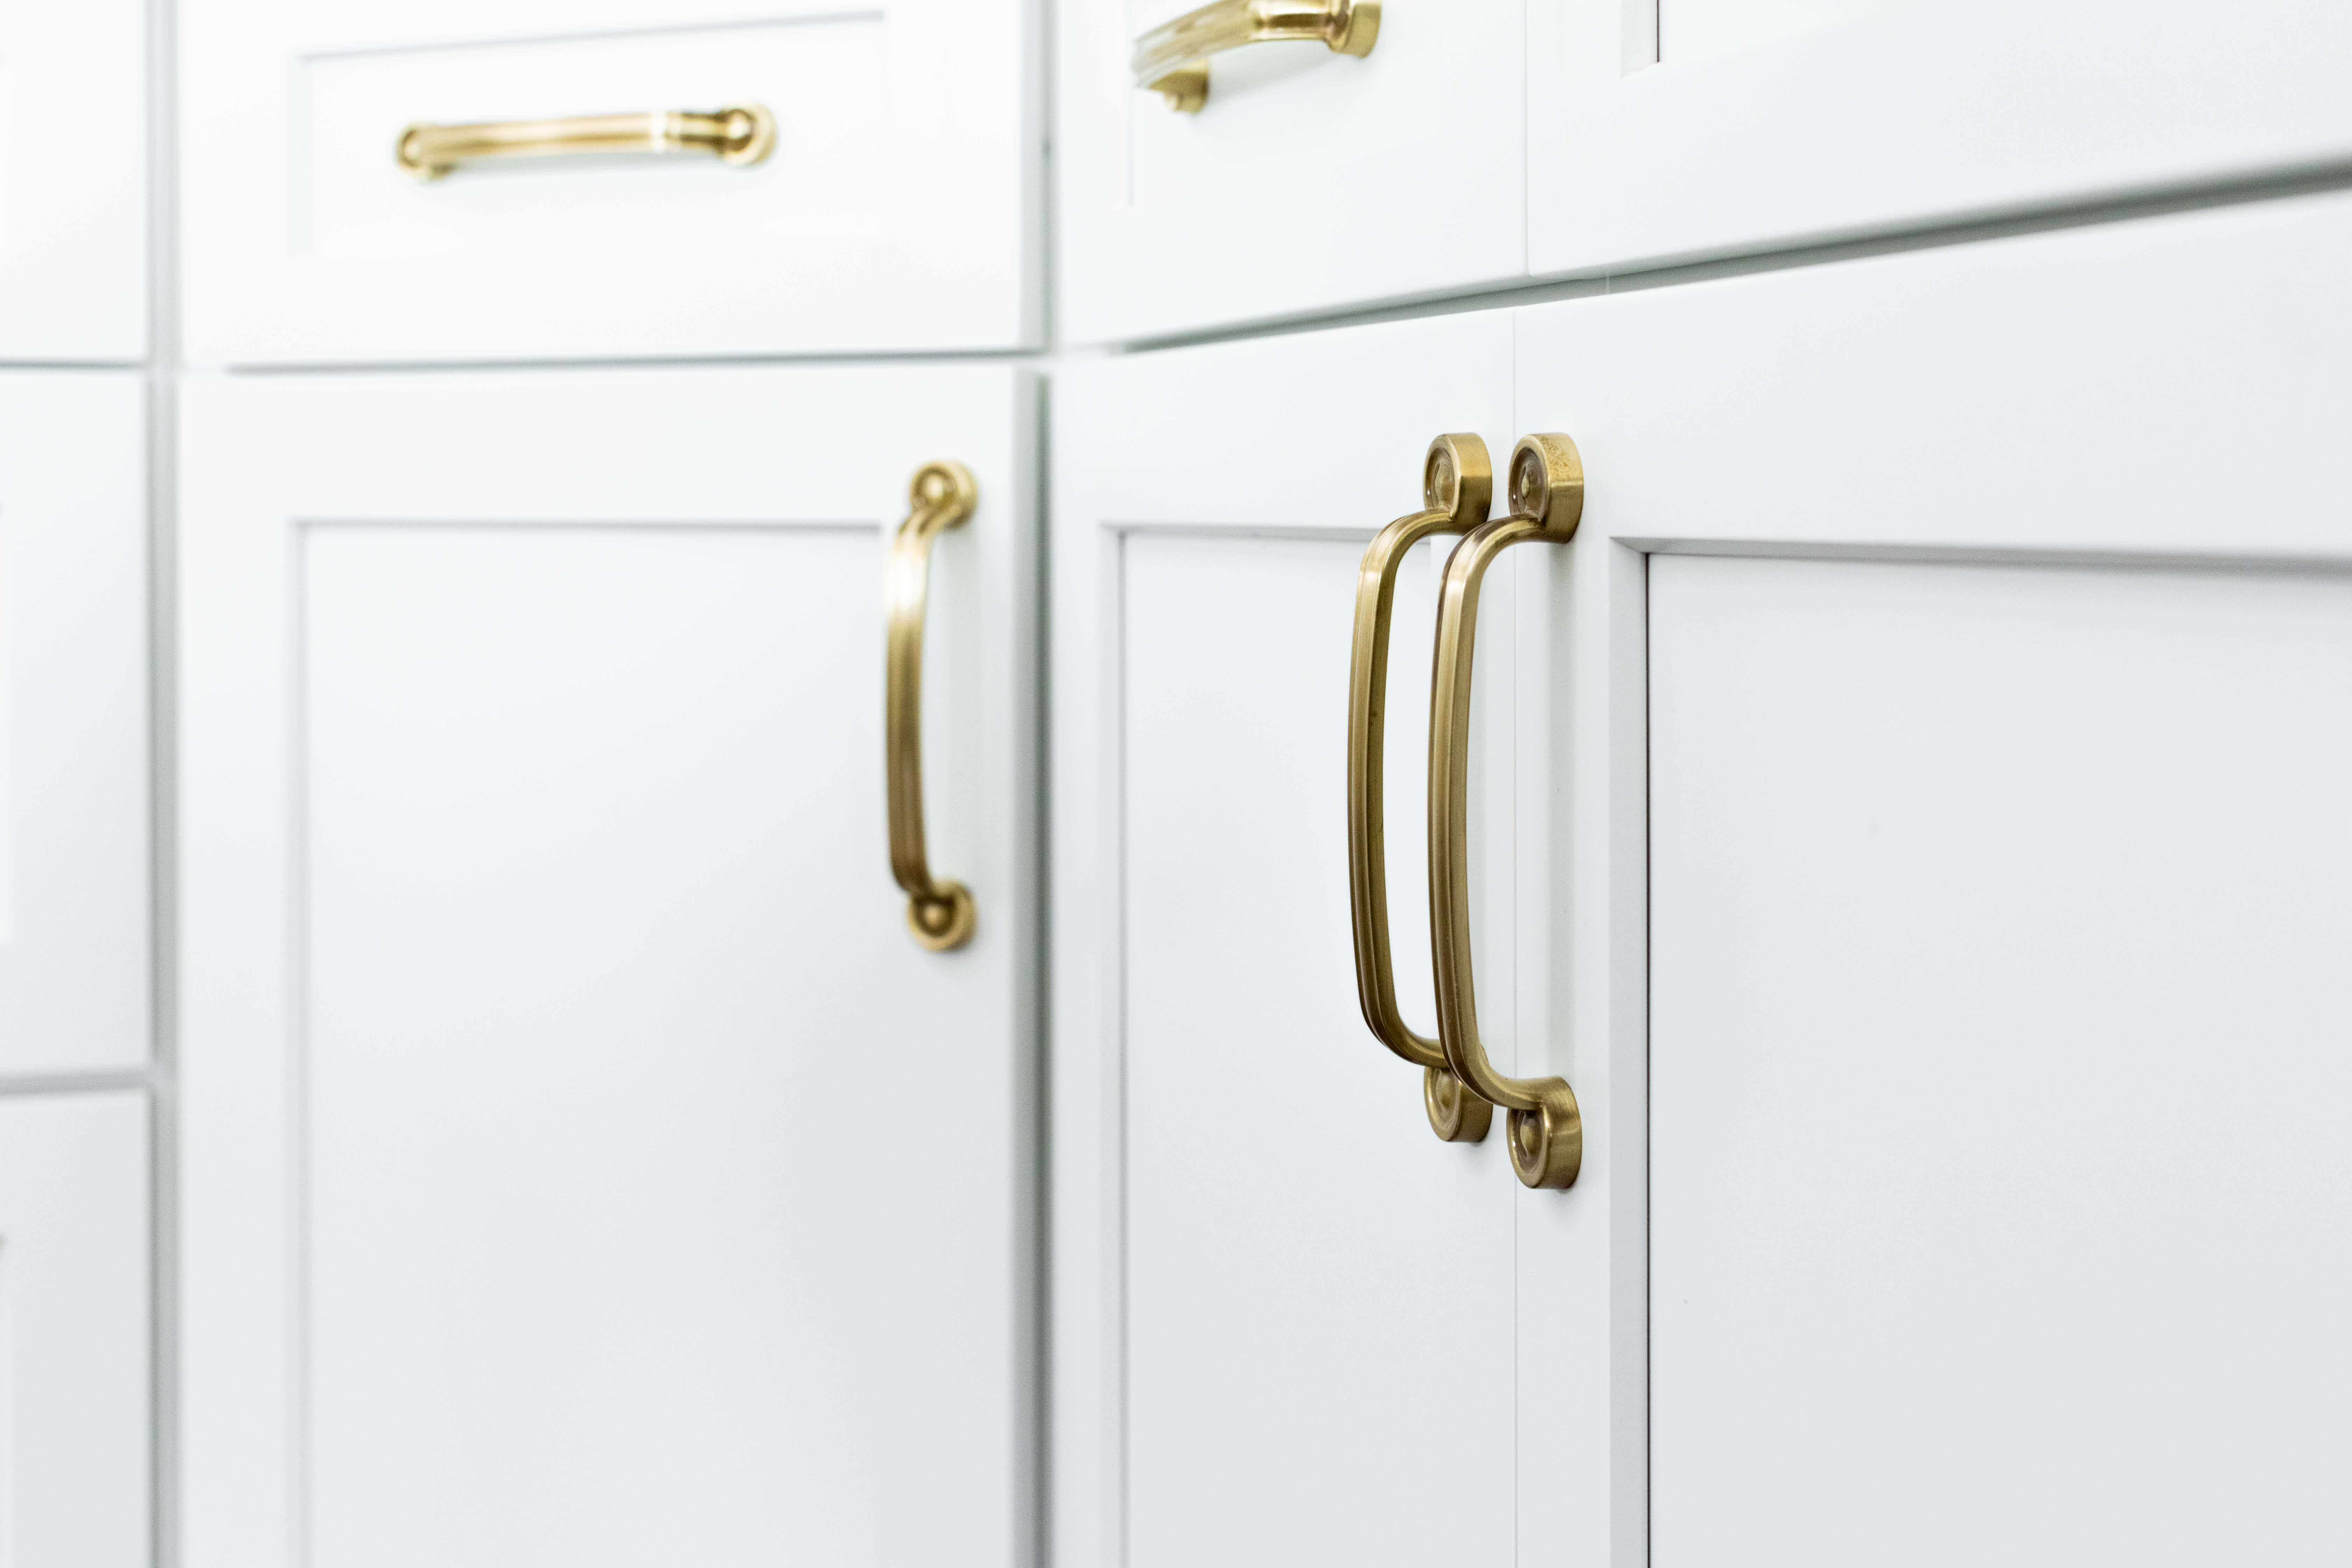 A close up of elegant white painted cabinets with a shaker door style made of Premium HDF material designed to create high-quality painted cabinetry with smooth durable surfaces, crisp details, and stable wood material.